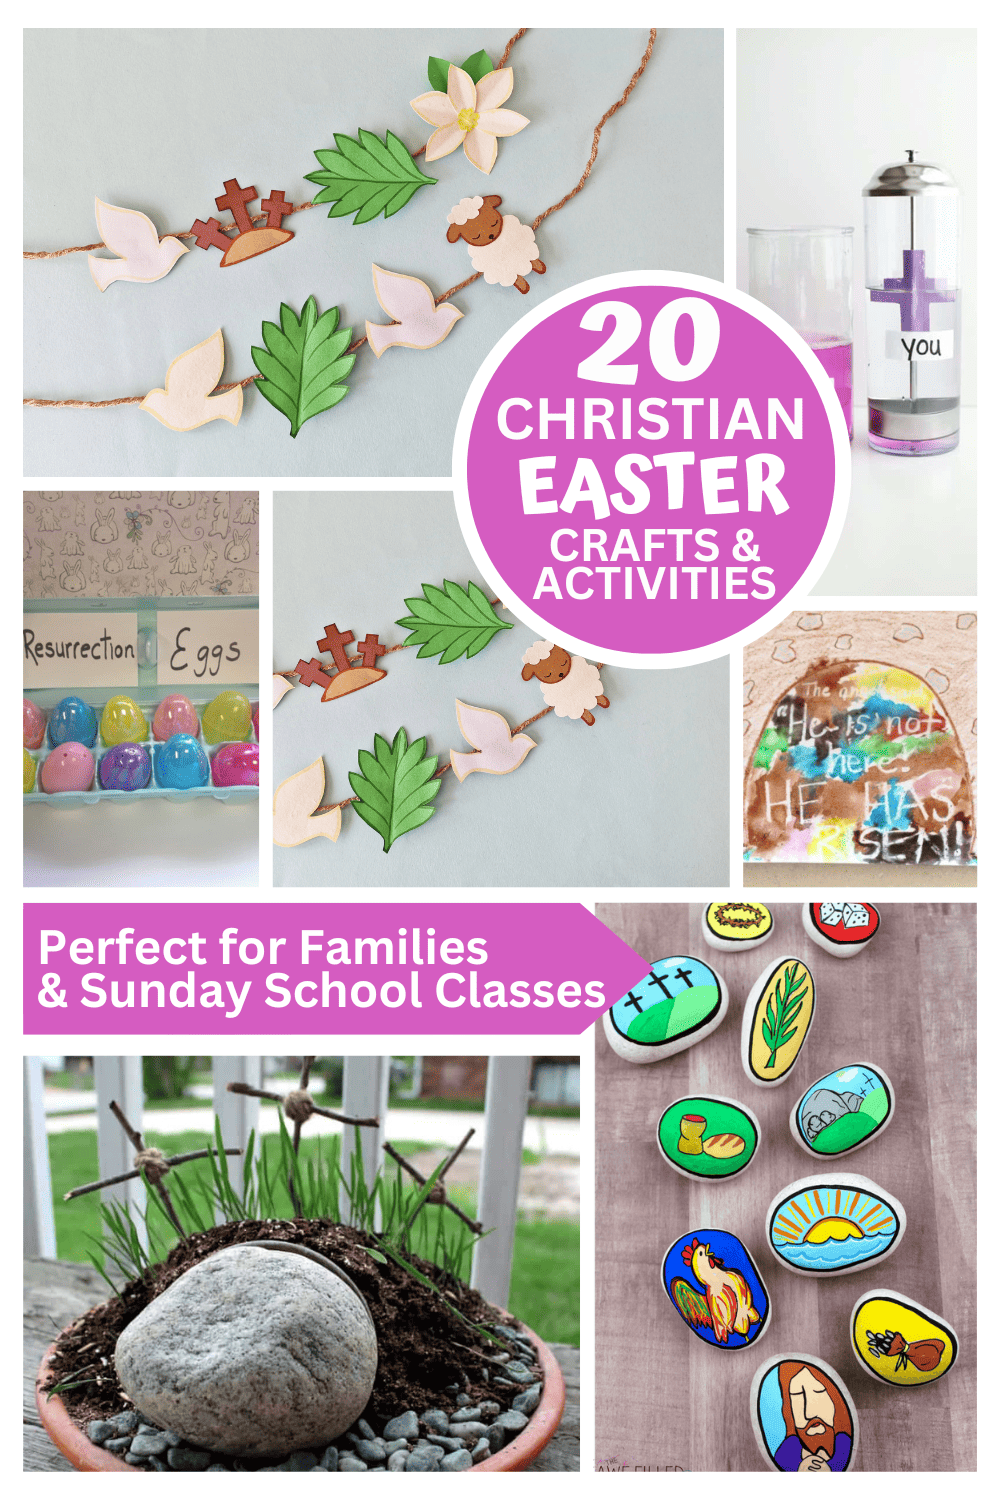 19 Christ Centered Easter Activities for Families - Big Family Blessings